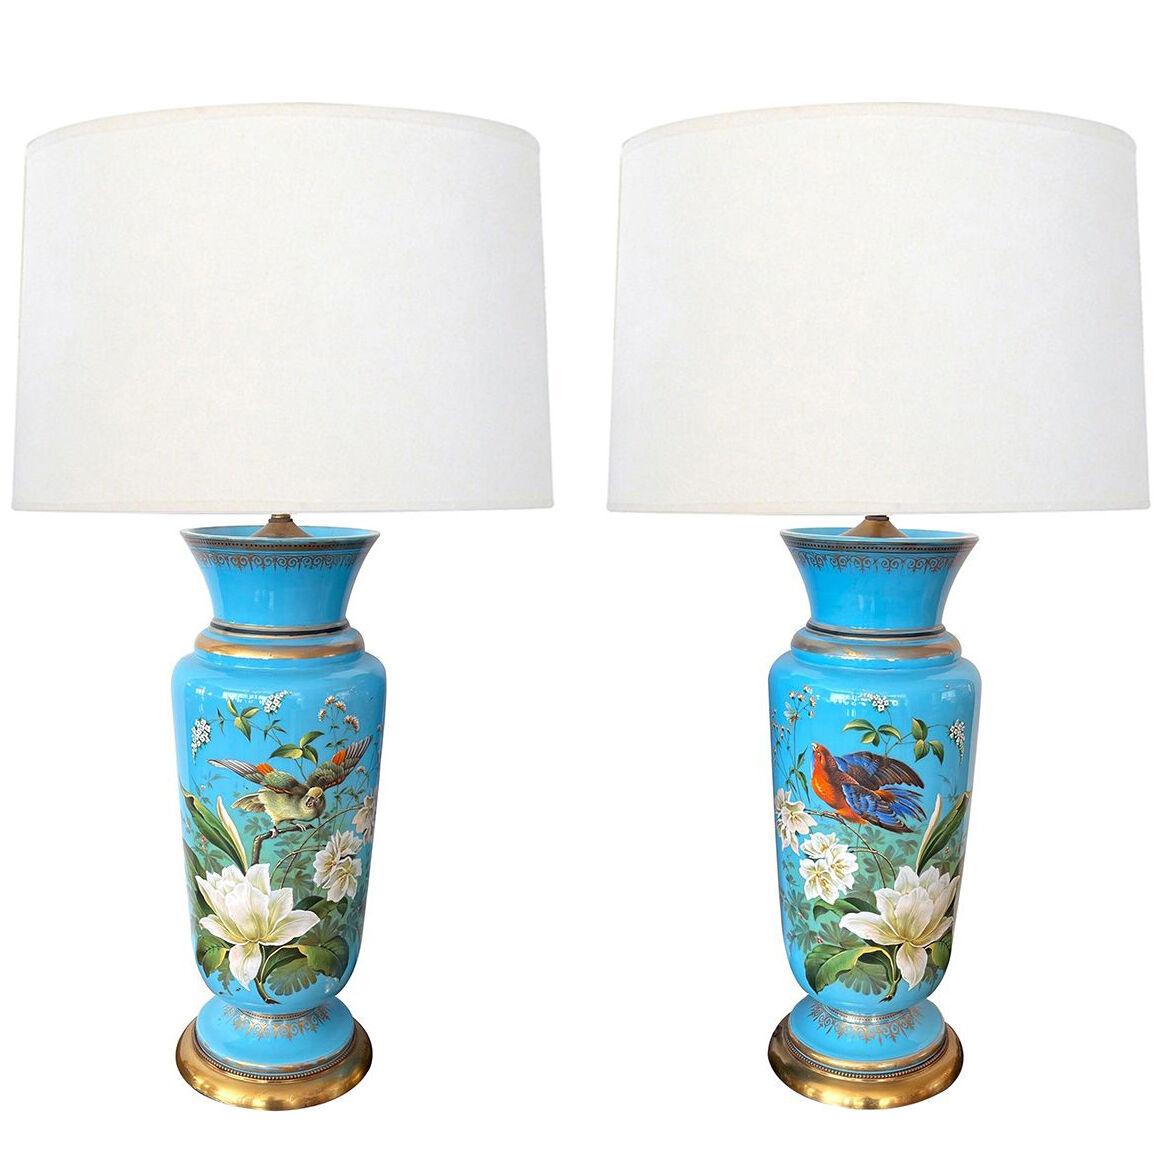 Fine pair of French cerulean blue opaline lamps with polychromed decoration